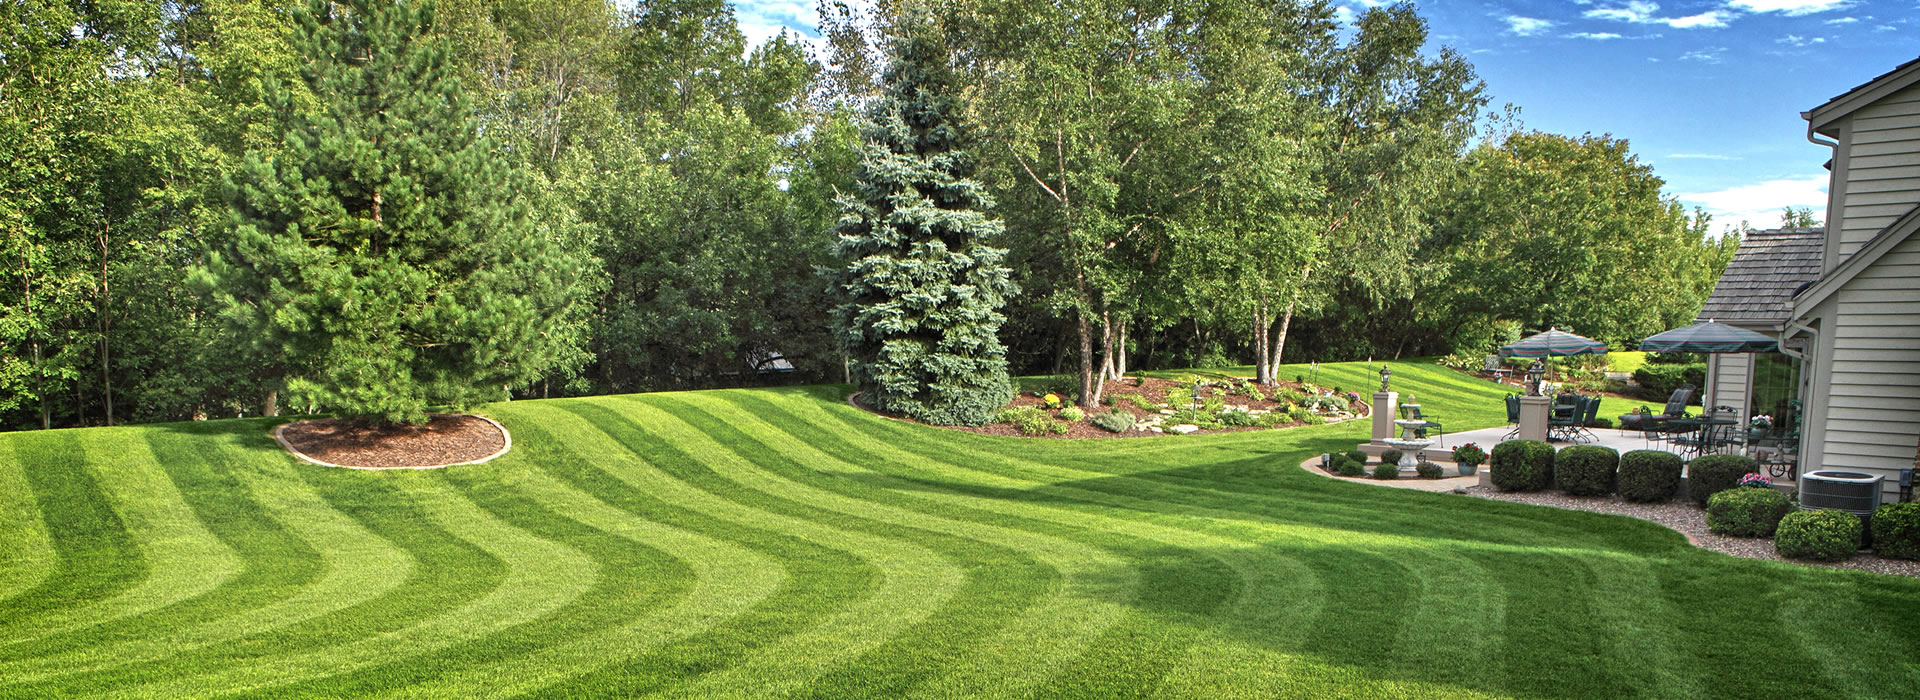 Lawn Care in Duluth